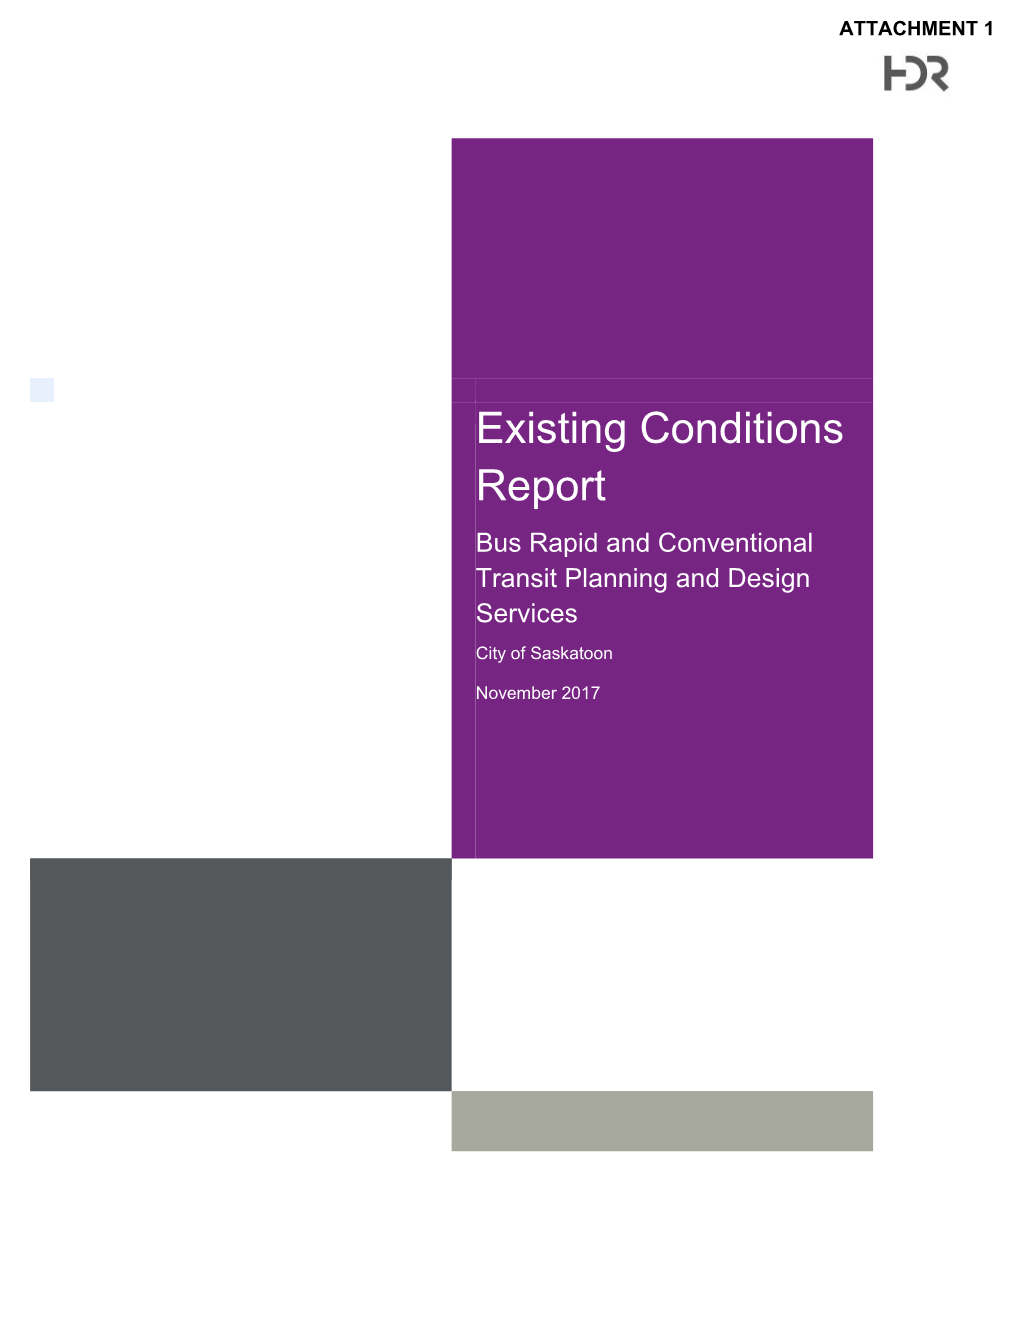 Existing Conditions Report Bus Rapid and Conventional Transit Planning and Design Services City of Saskatoon